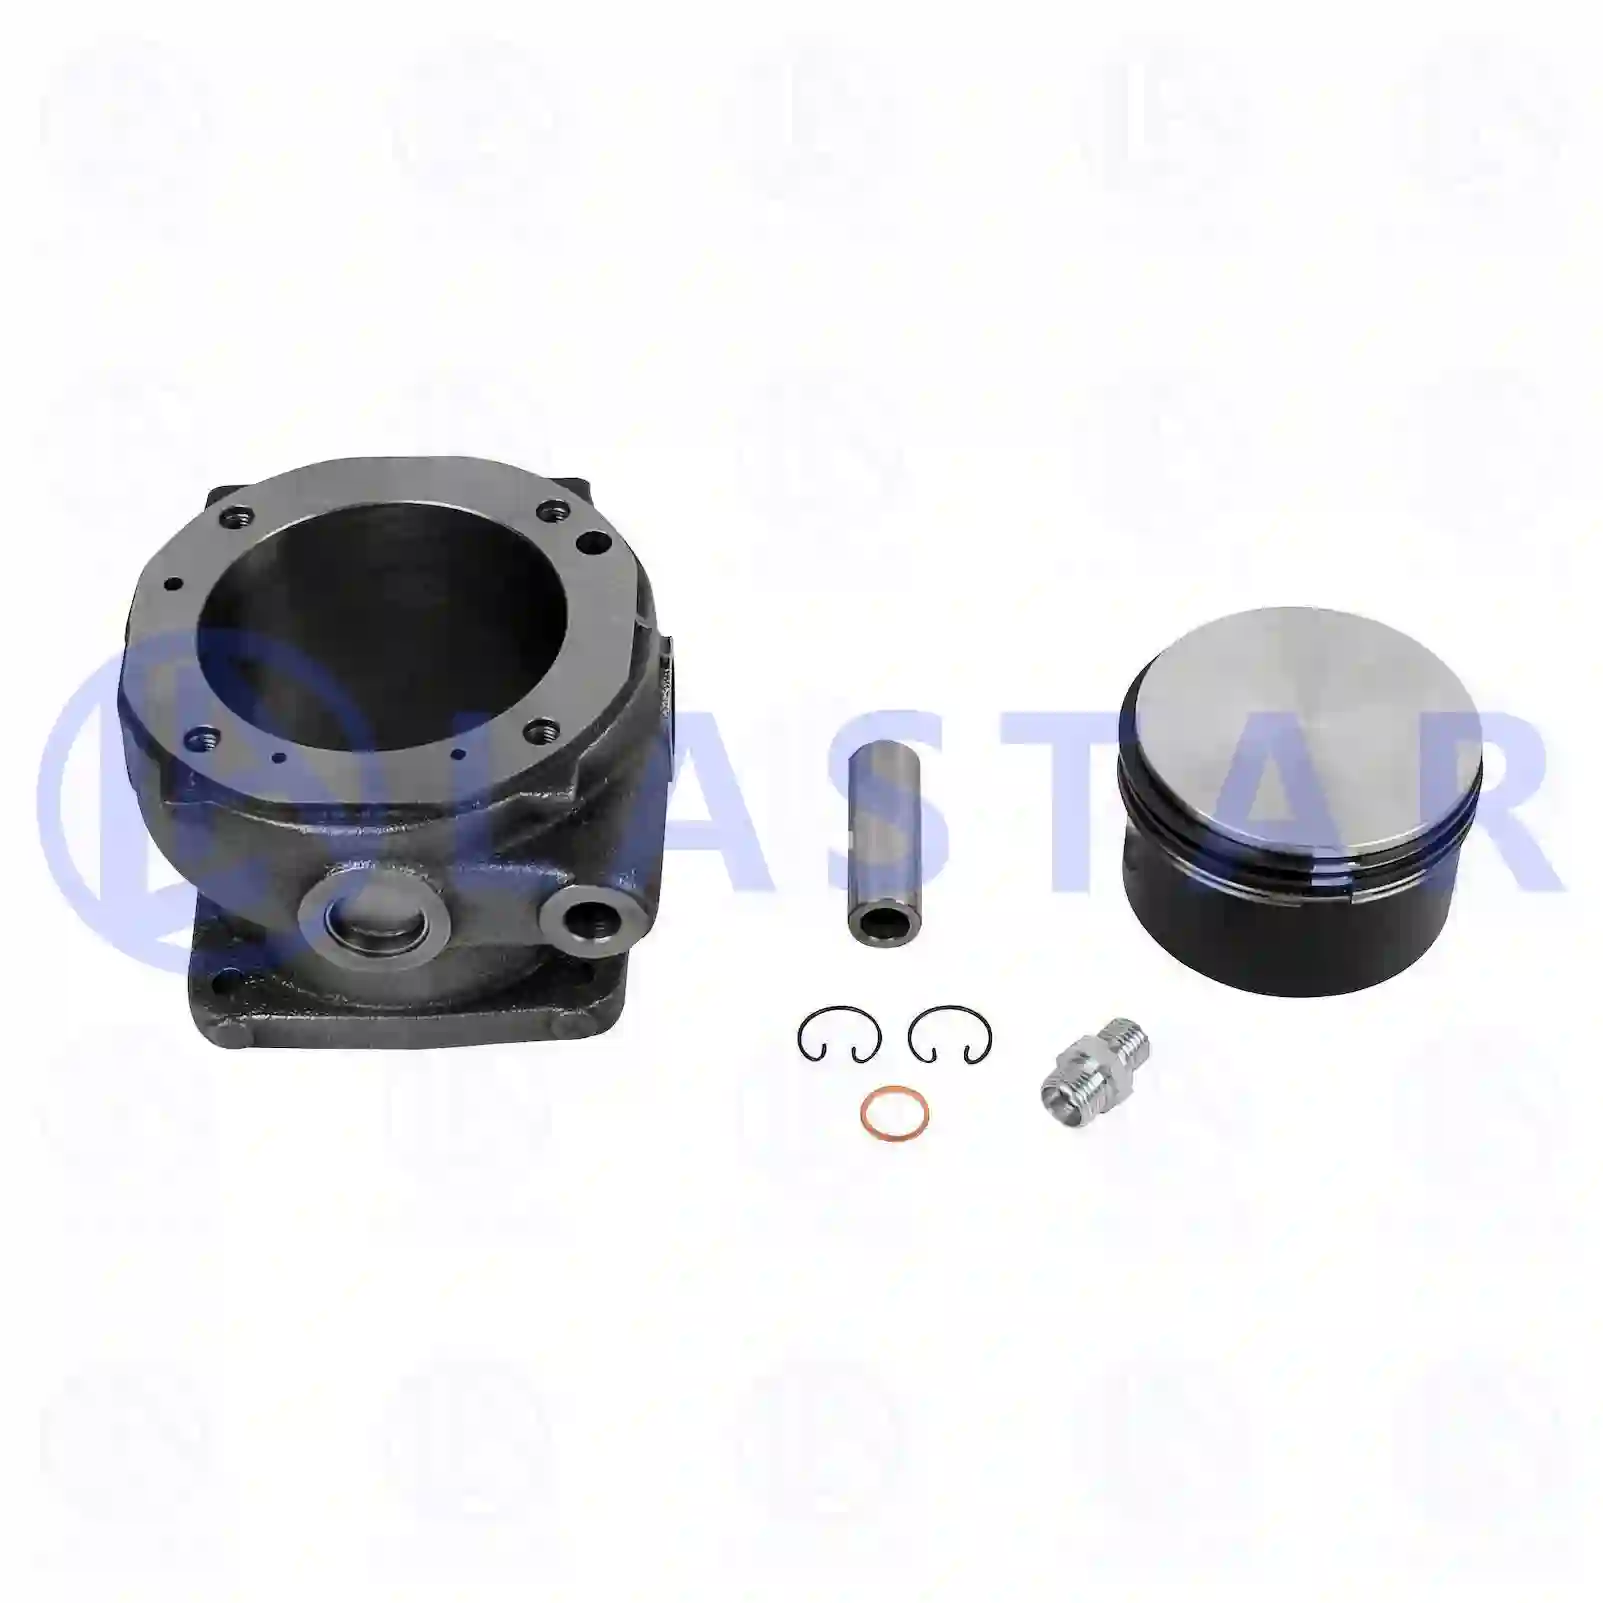 Piston and liner kit, water cooled, 77714367, 51541050006, 51541056002, 51541056004, 51541056005, 51541056007, 51541056008, 4021300208, 4021300308, 4021300380, 4021300608, 4021310502, 4271300008, ZG50562-0008 ||  77714367 Lastar Spare Part | Truck Spare Parts, Auotomotive Spare Parts Piston and liner kit, water cooled, 77714367, 51541050006, 51541056002, 51541056004, 51541056005, 51541056007, 51541056008, 4021300208, 4021300308, 4021300380, 4021300608, 4021310502, 4271300008, ZG50562-0008 ||  77714367 Lastar Spare Part | Truck Spare Parts, Auotomotive Spare Parts